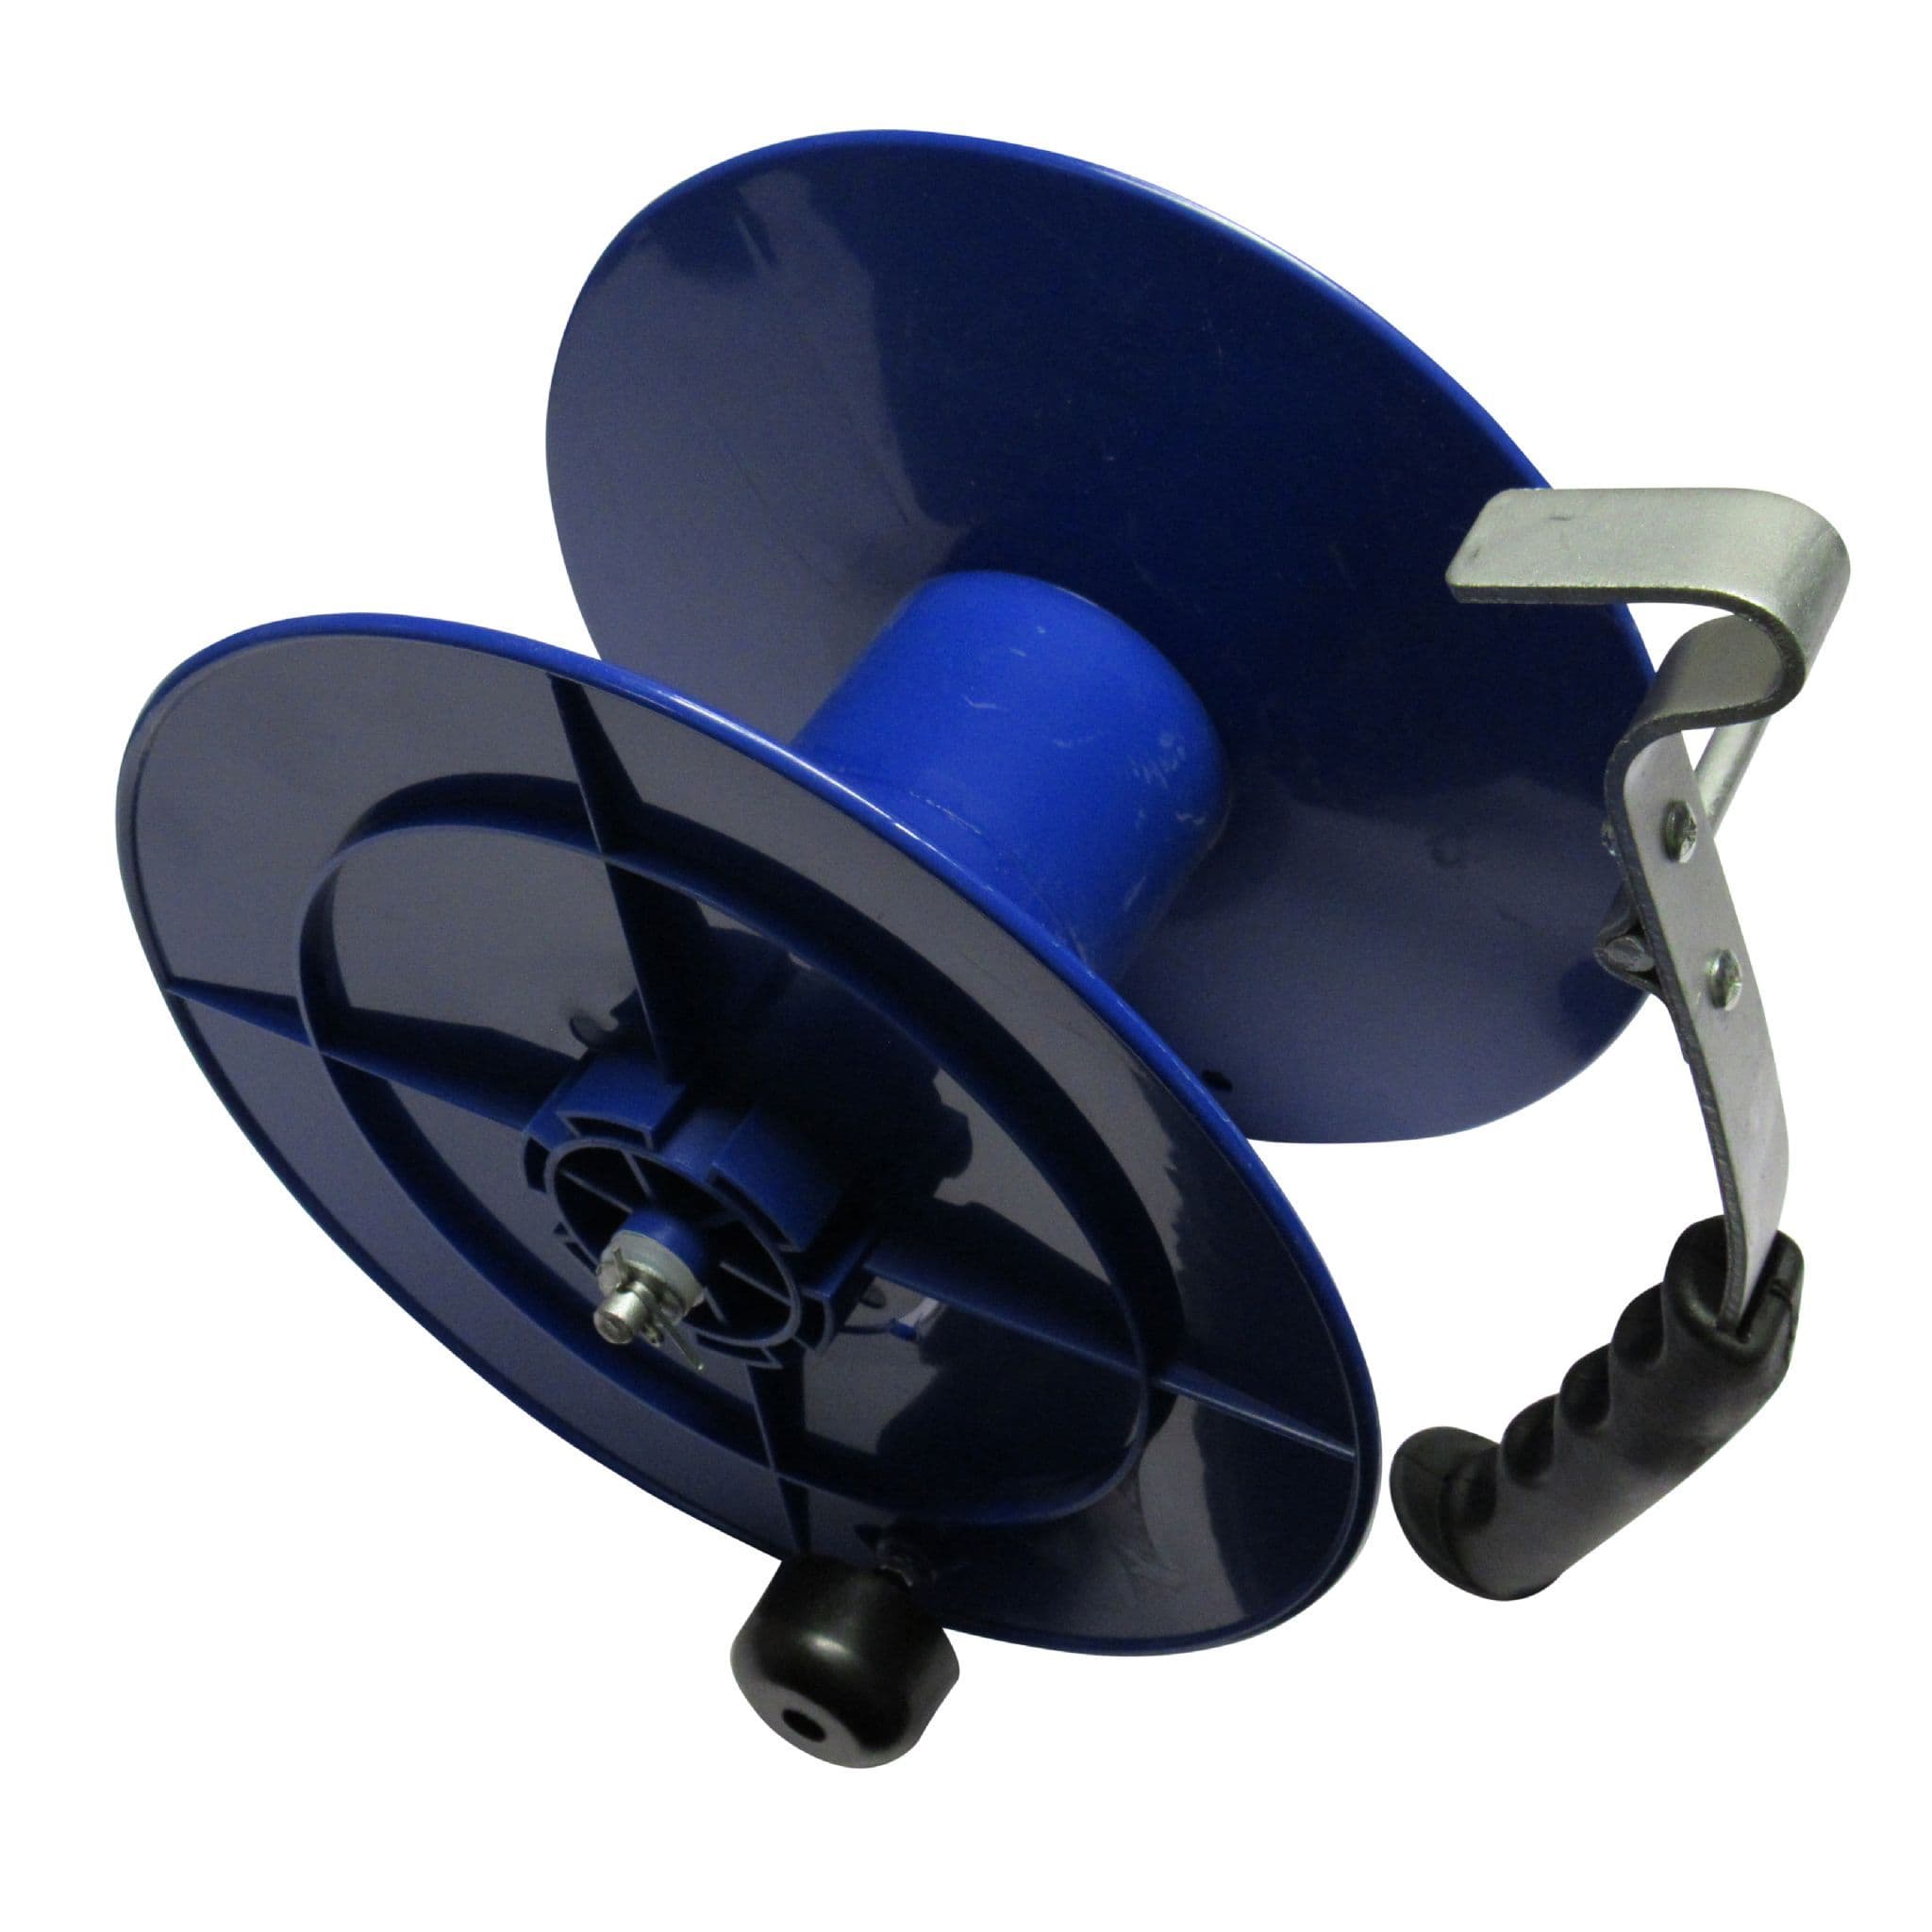 SecureFix Direct on X: More Treats - NEW IN STOCK - Electric Fencing  Insulating Reel Spool Keep your livestock safe and secure with this Electric  Fencing Insulating Reel Spool!    /